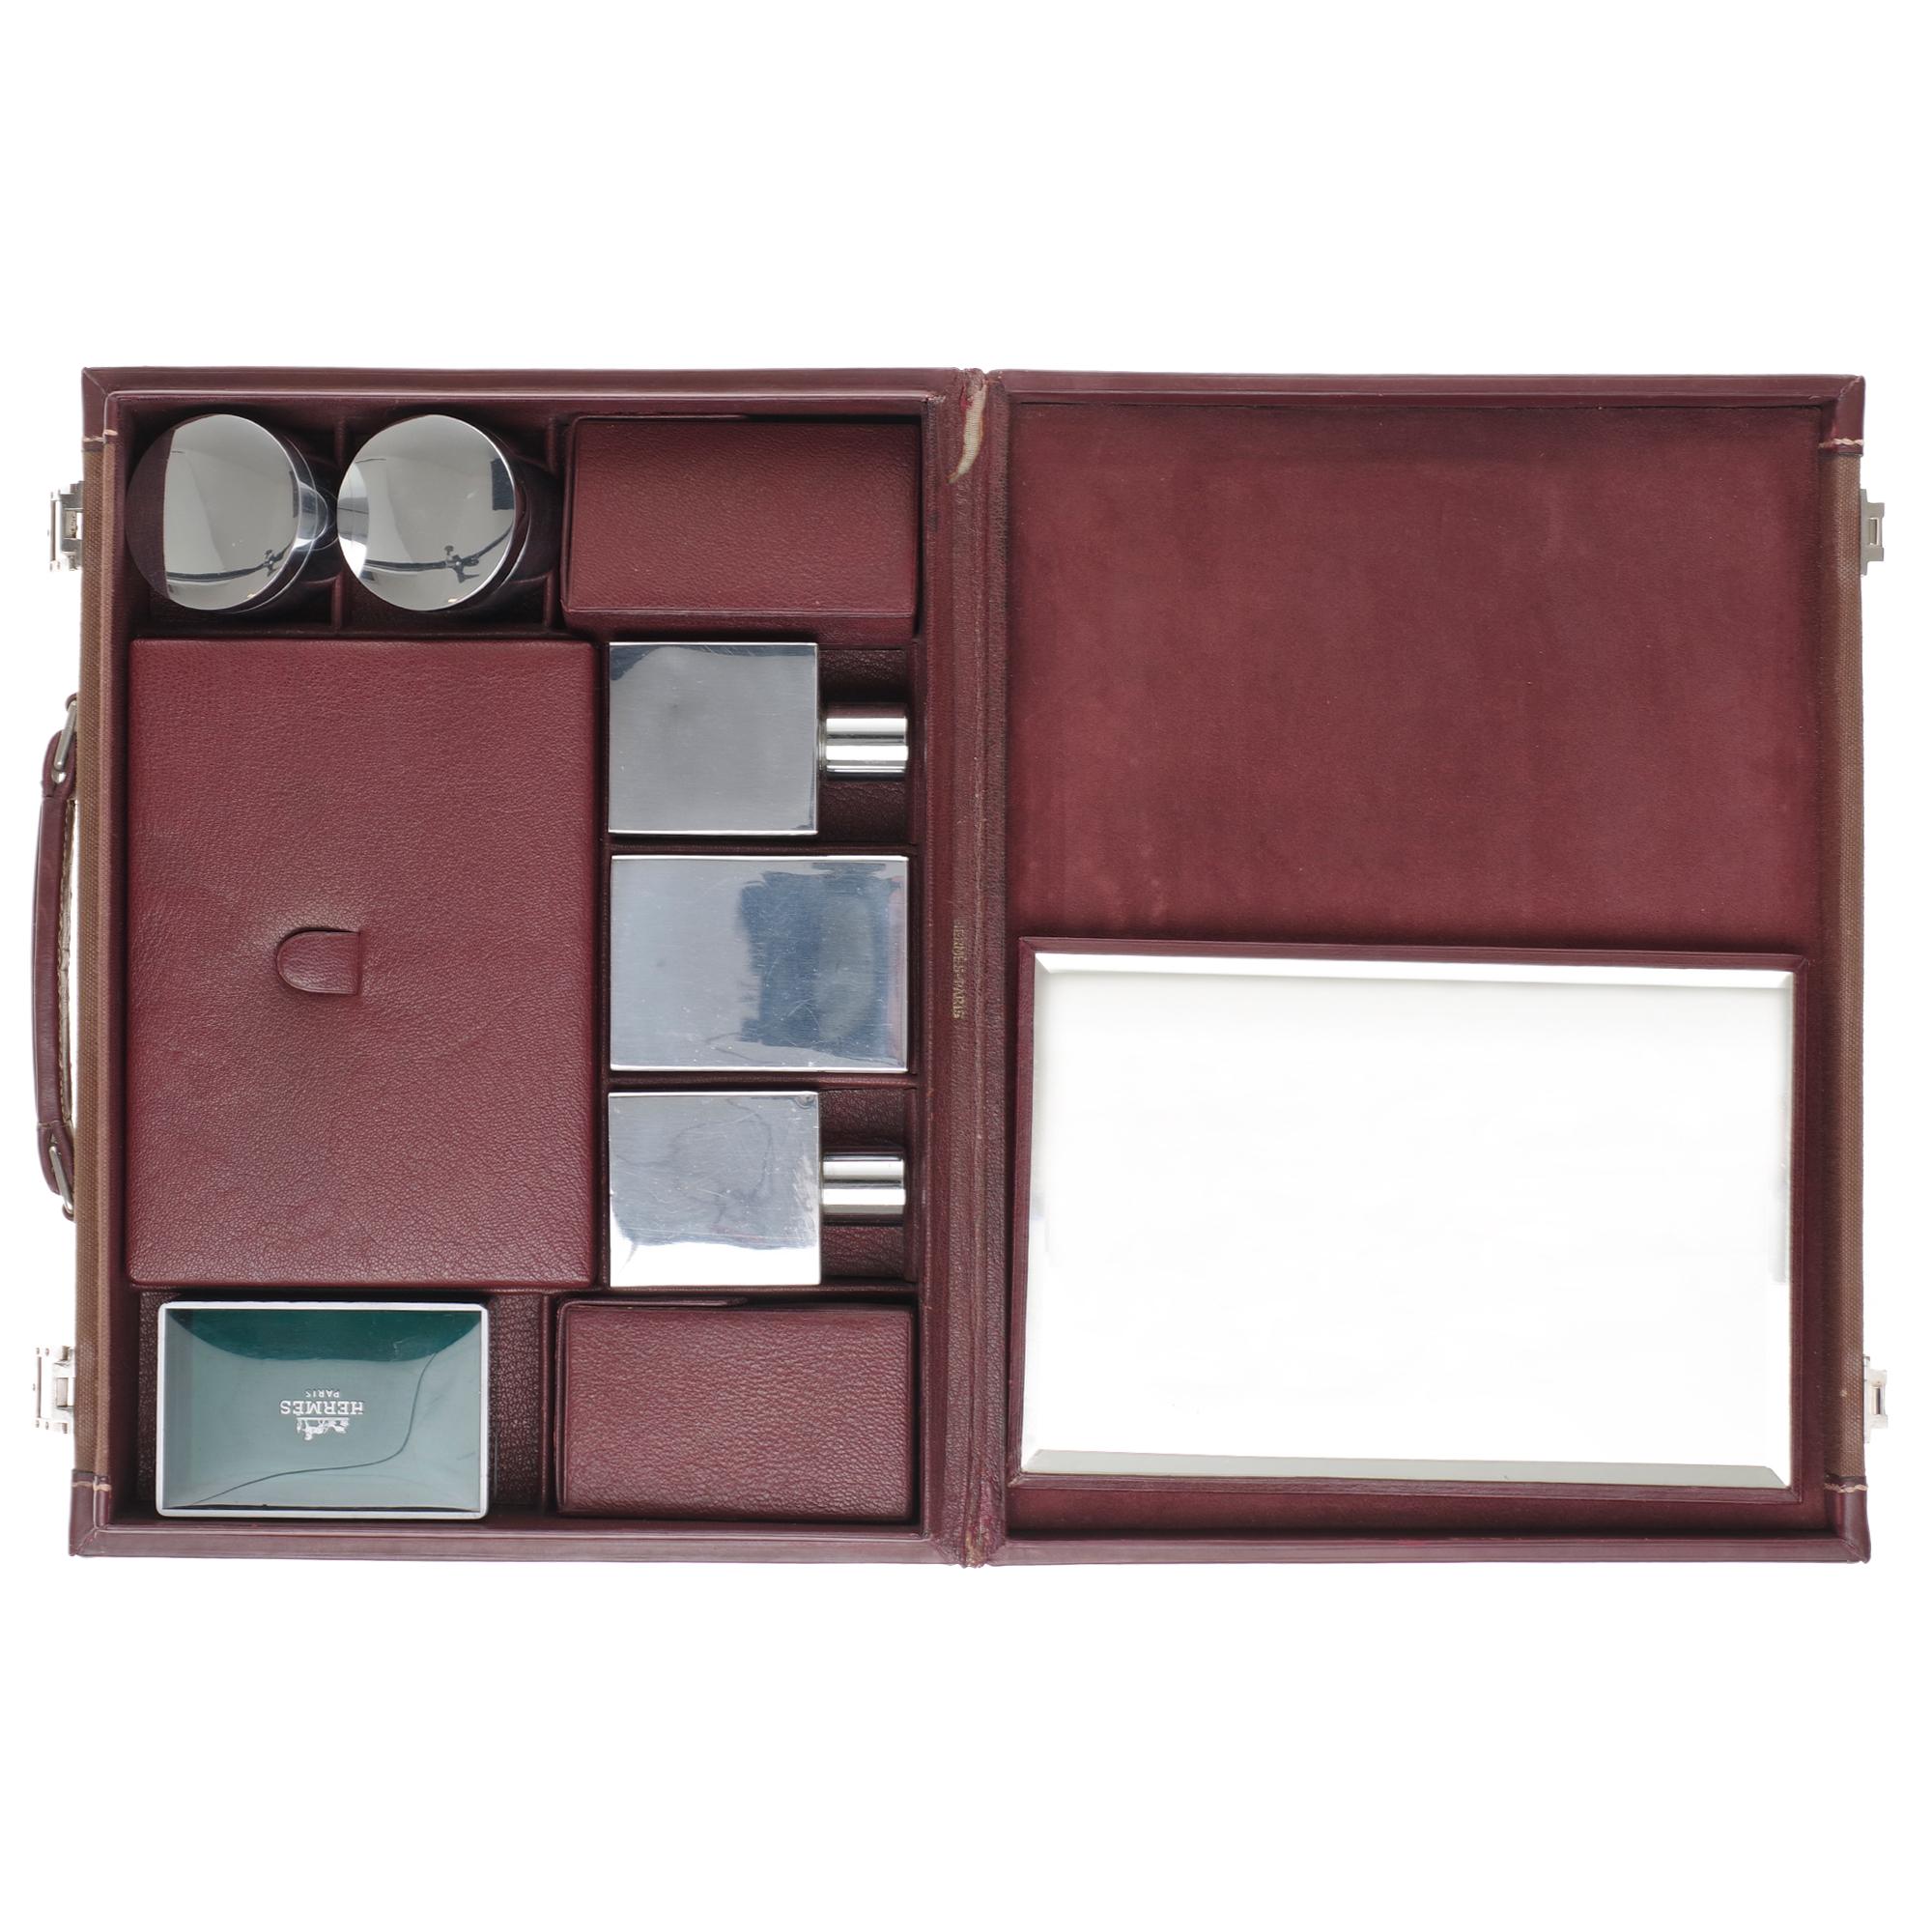 Beautiful collector’s piece !

Hermès bi-material cosmetic case in burgundy leather and beige canvas, interior in burgundy suede
3 silver metal bottles, two round boxes
silver metal, 3 leather compartments, 1 green plastic soap box and a travel